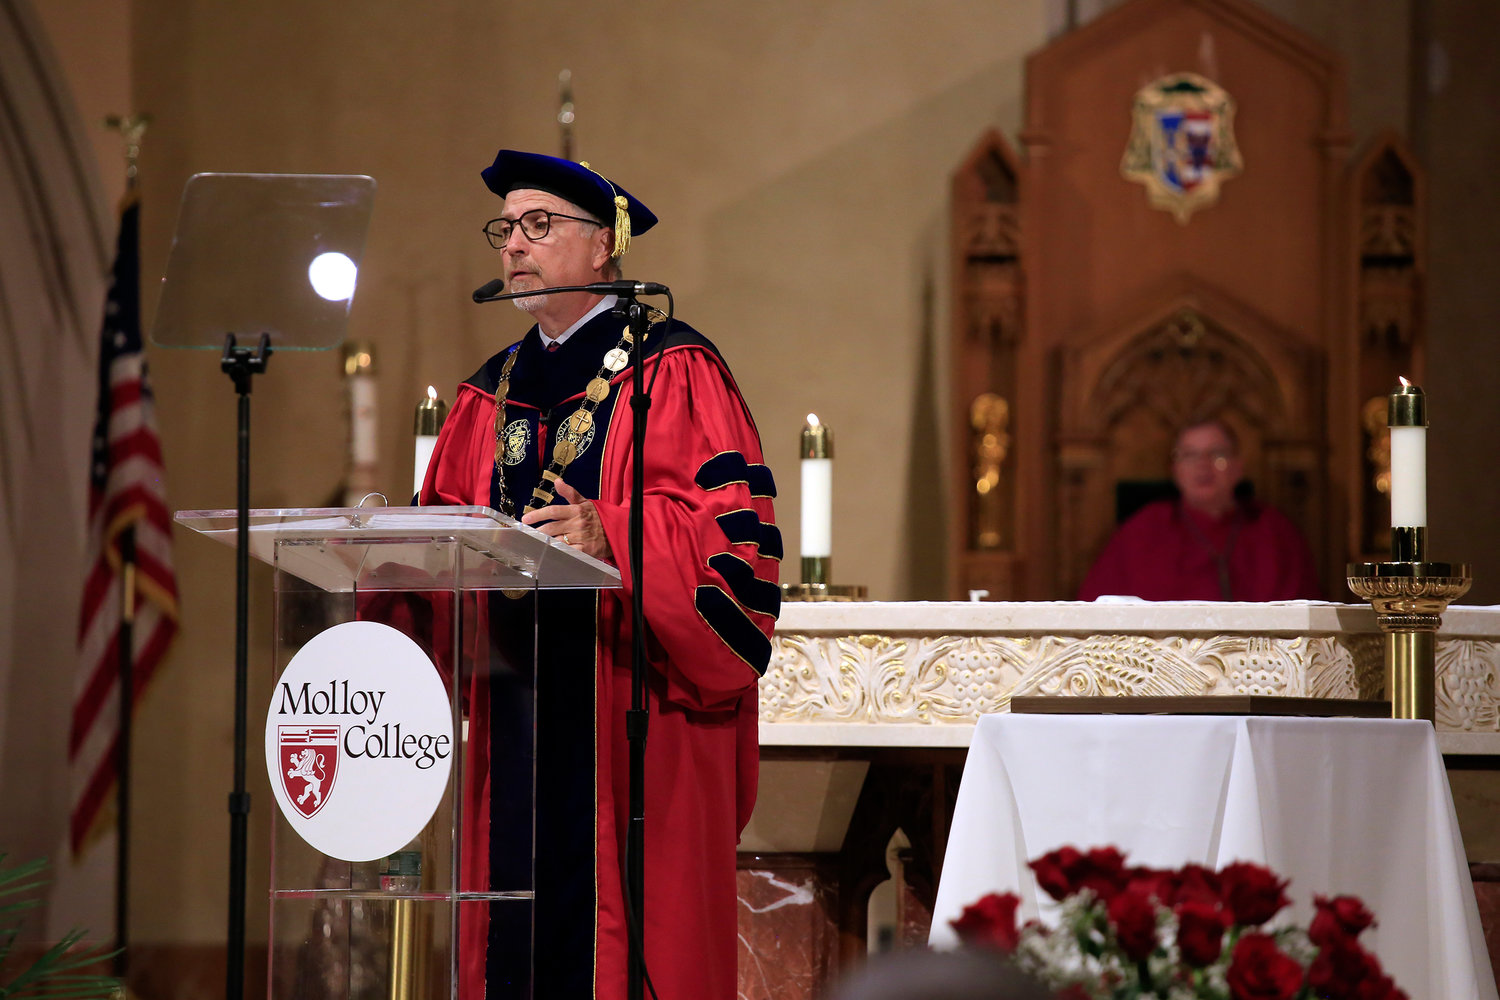 James P. Lentini, D.M.A. is installed at the 7th President of Molloy College.